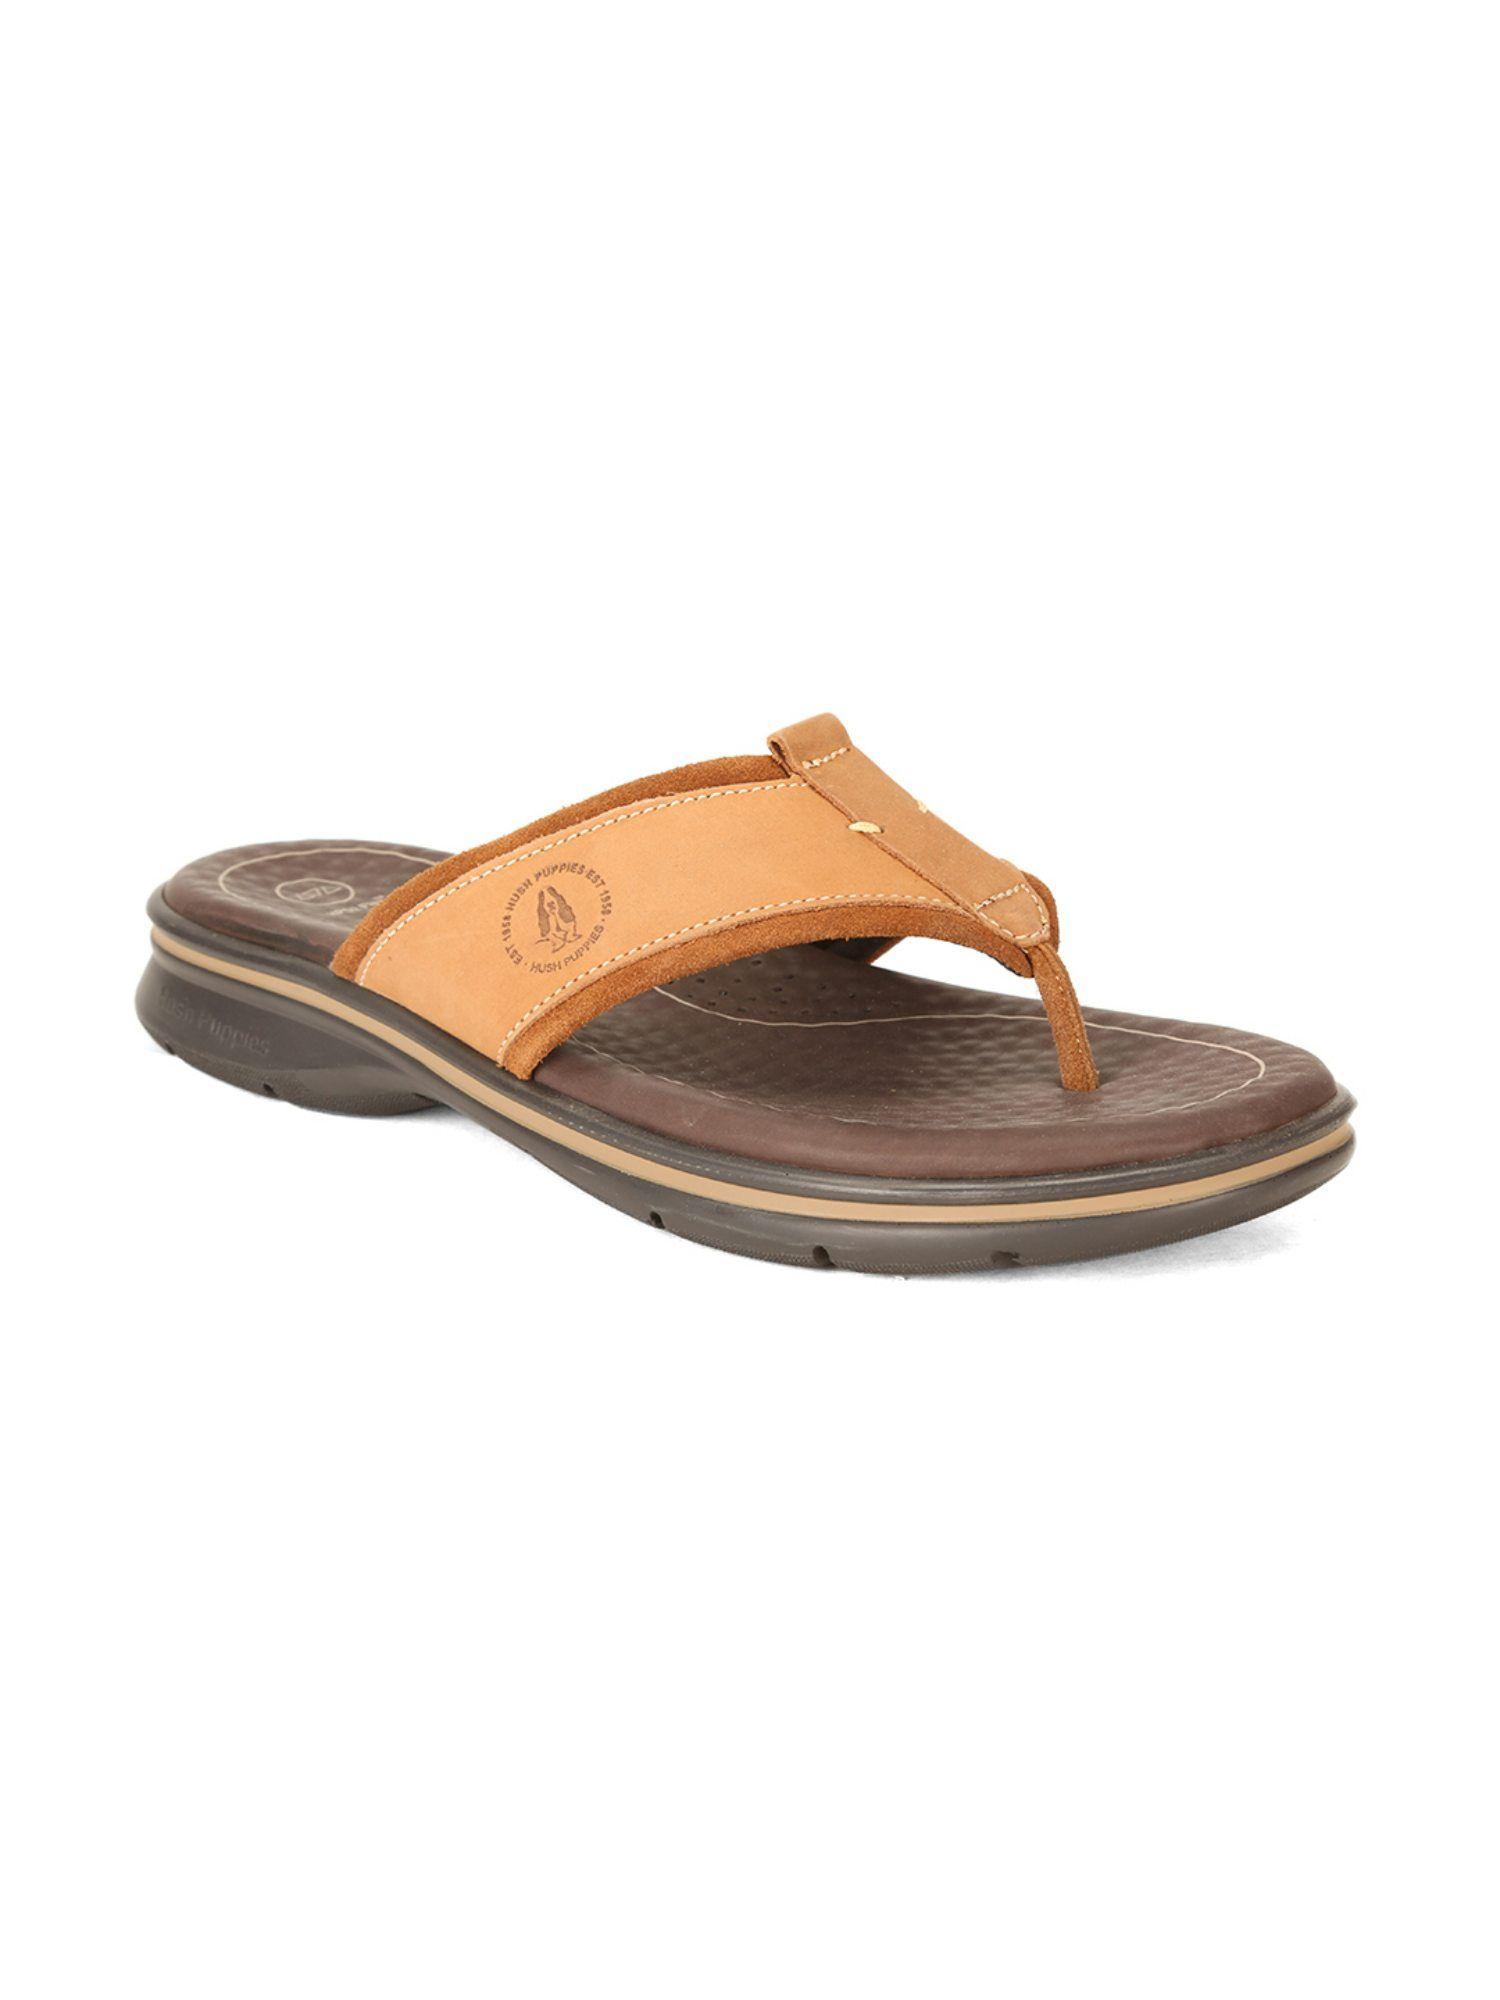 solid brown sandals